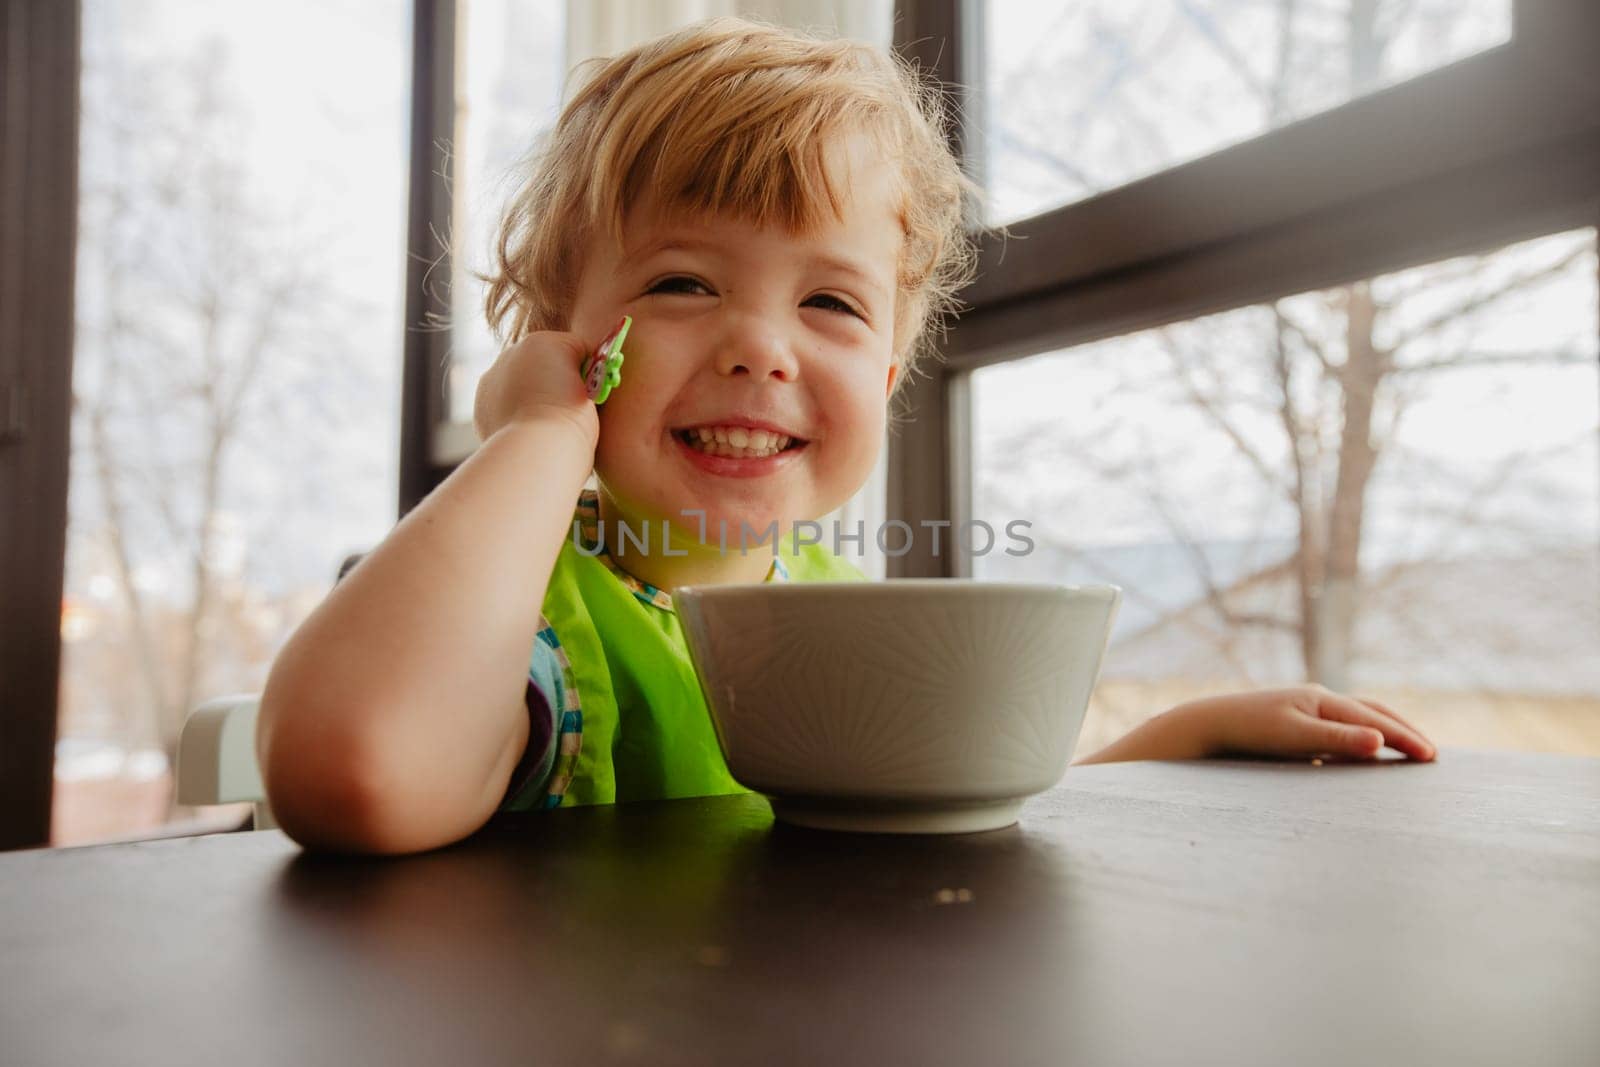 Smiling cute toddler sitting at table, eating and looking at camera indoors